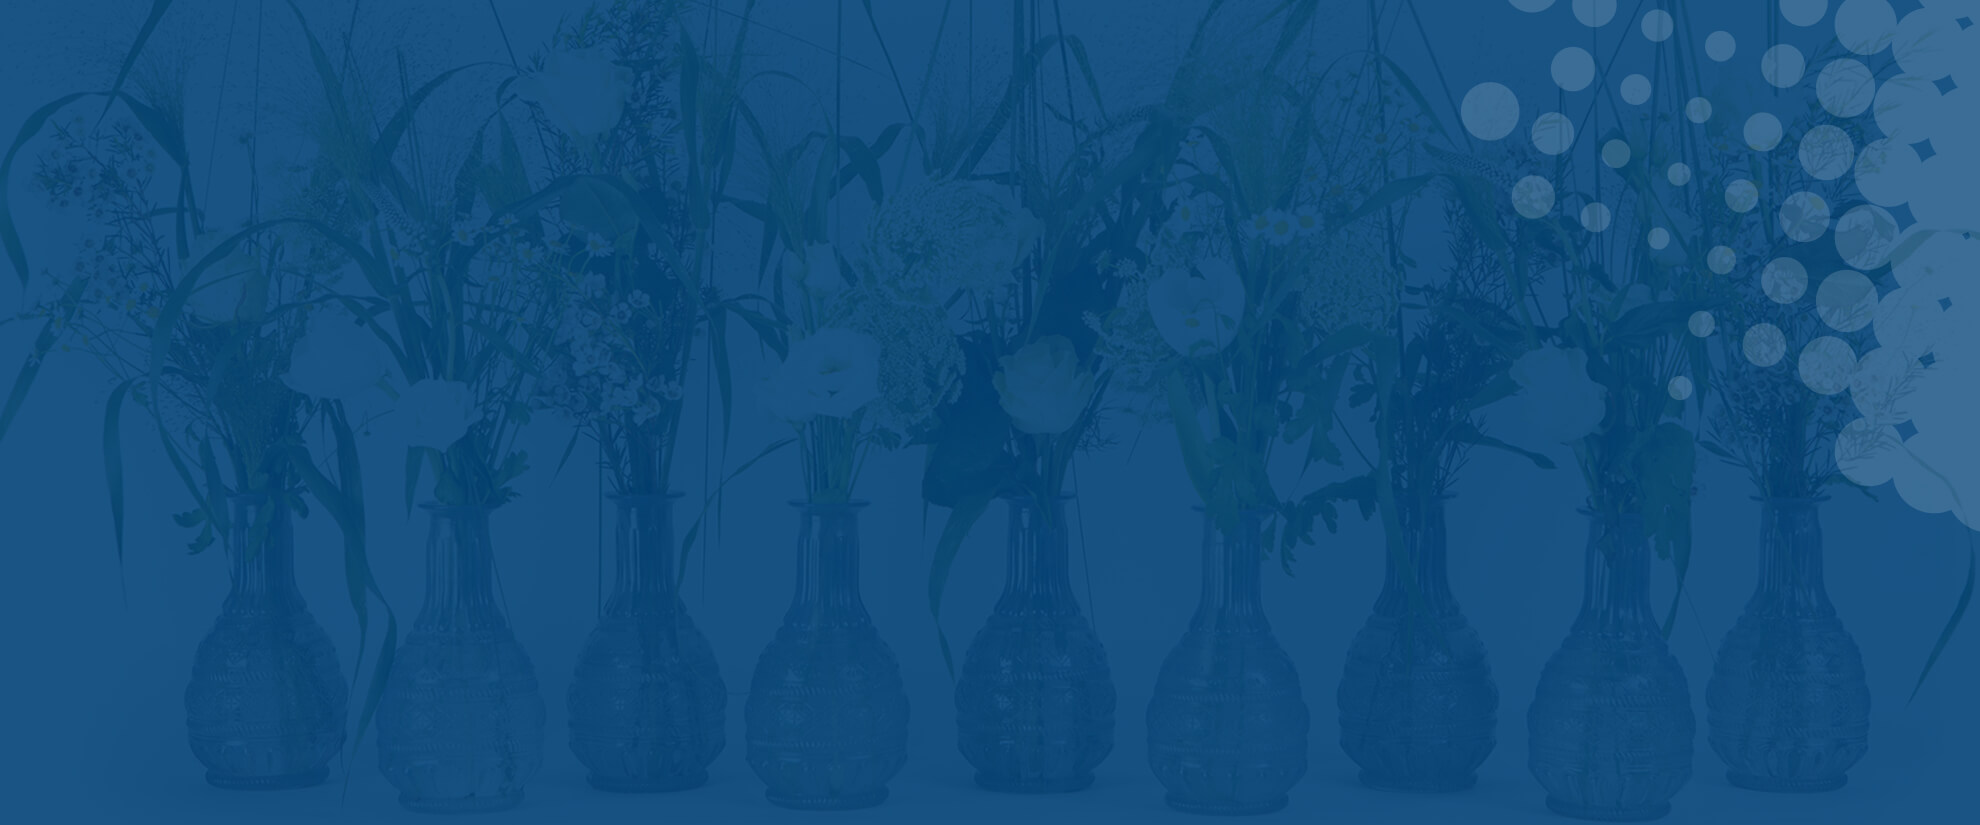 Flowers arranged in glass vases overlaying a blue background